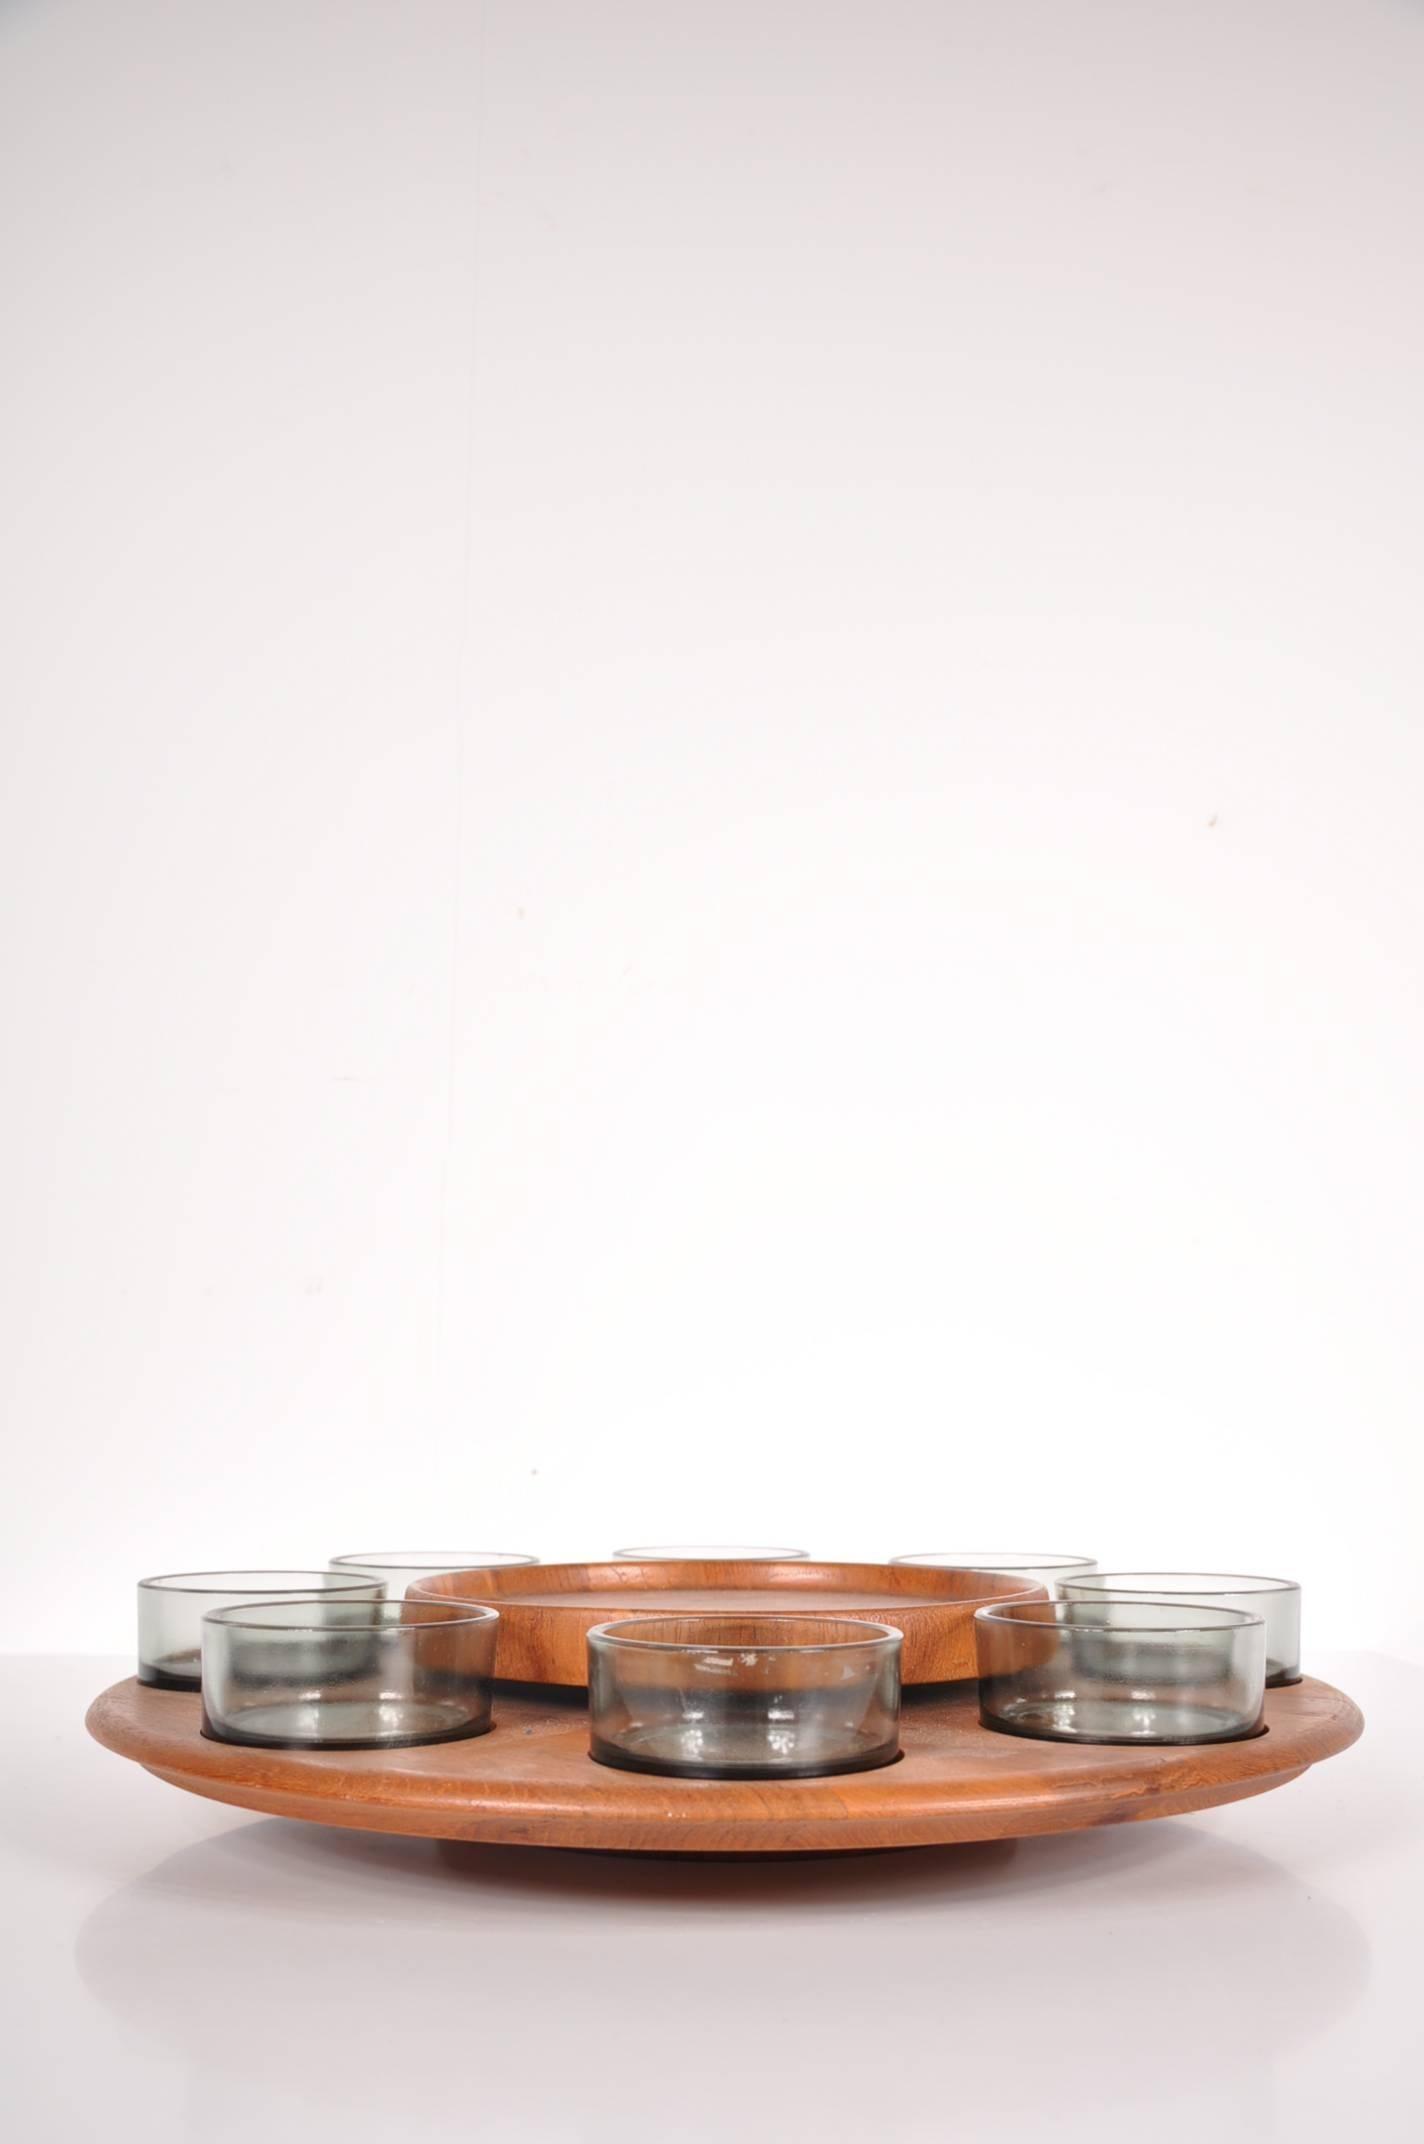 Unique carousel serving tray, manufactured by Digsmed in Denmark around 1950.

This lovely piece is entirely made of teak wood. It holds eight glasses and has a round serving plateau in the middle. The outer circle holding the glasses can be